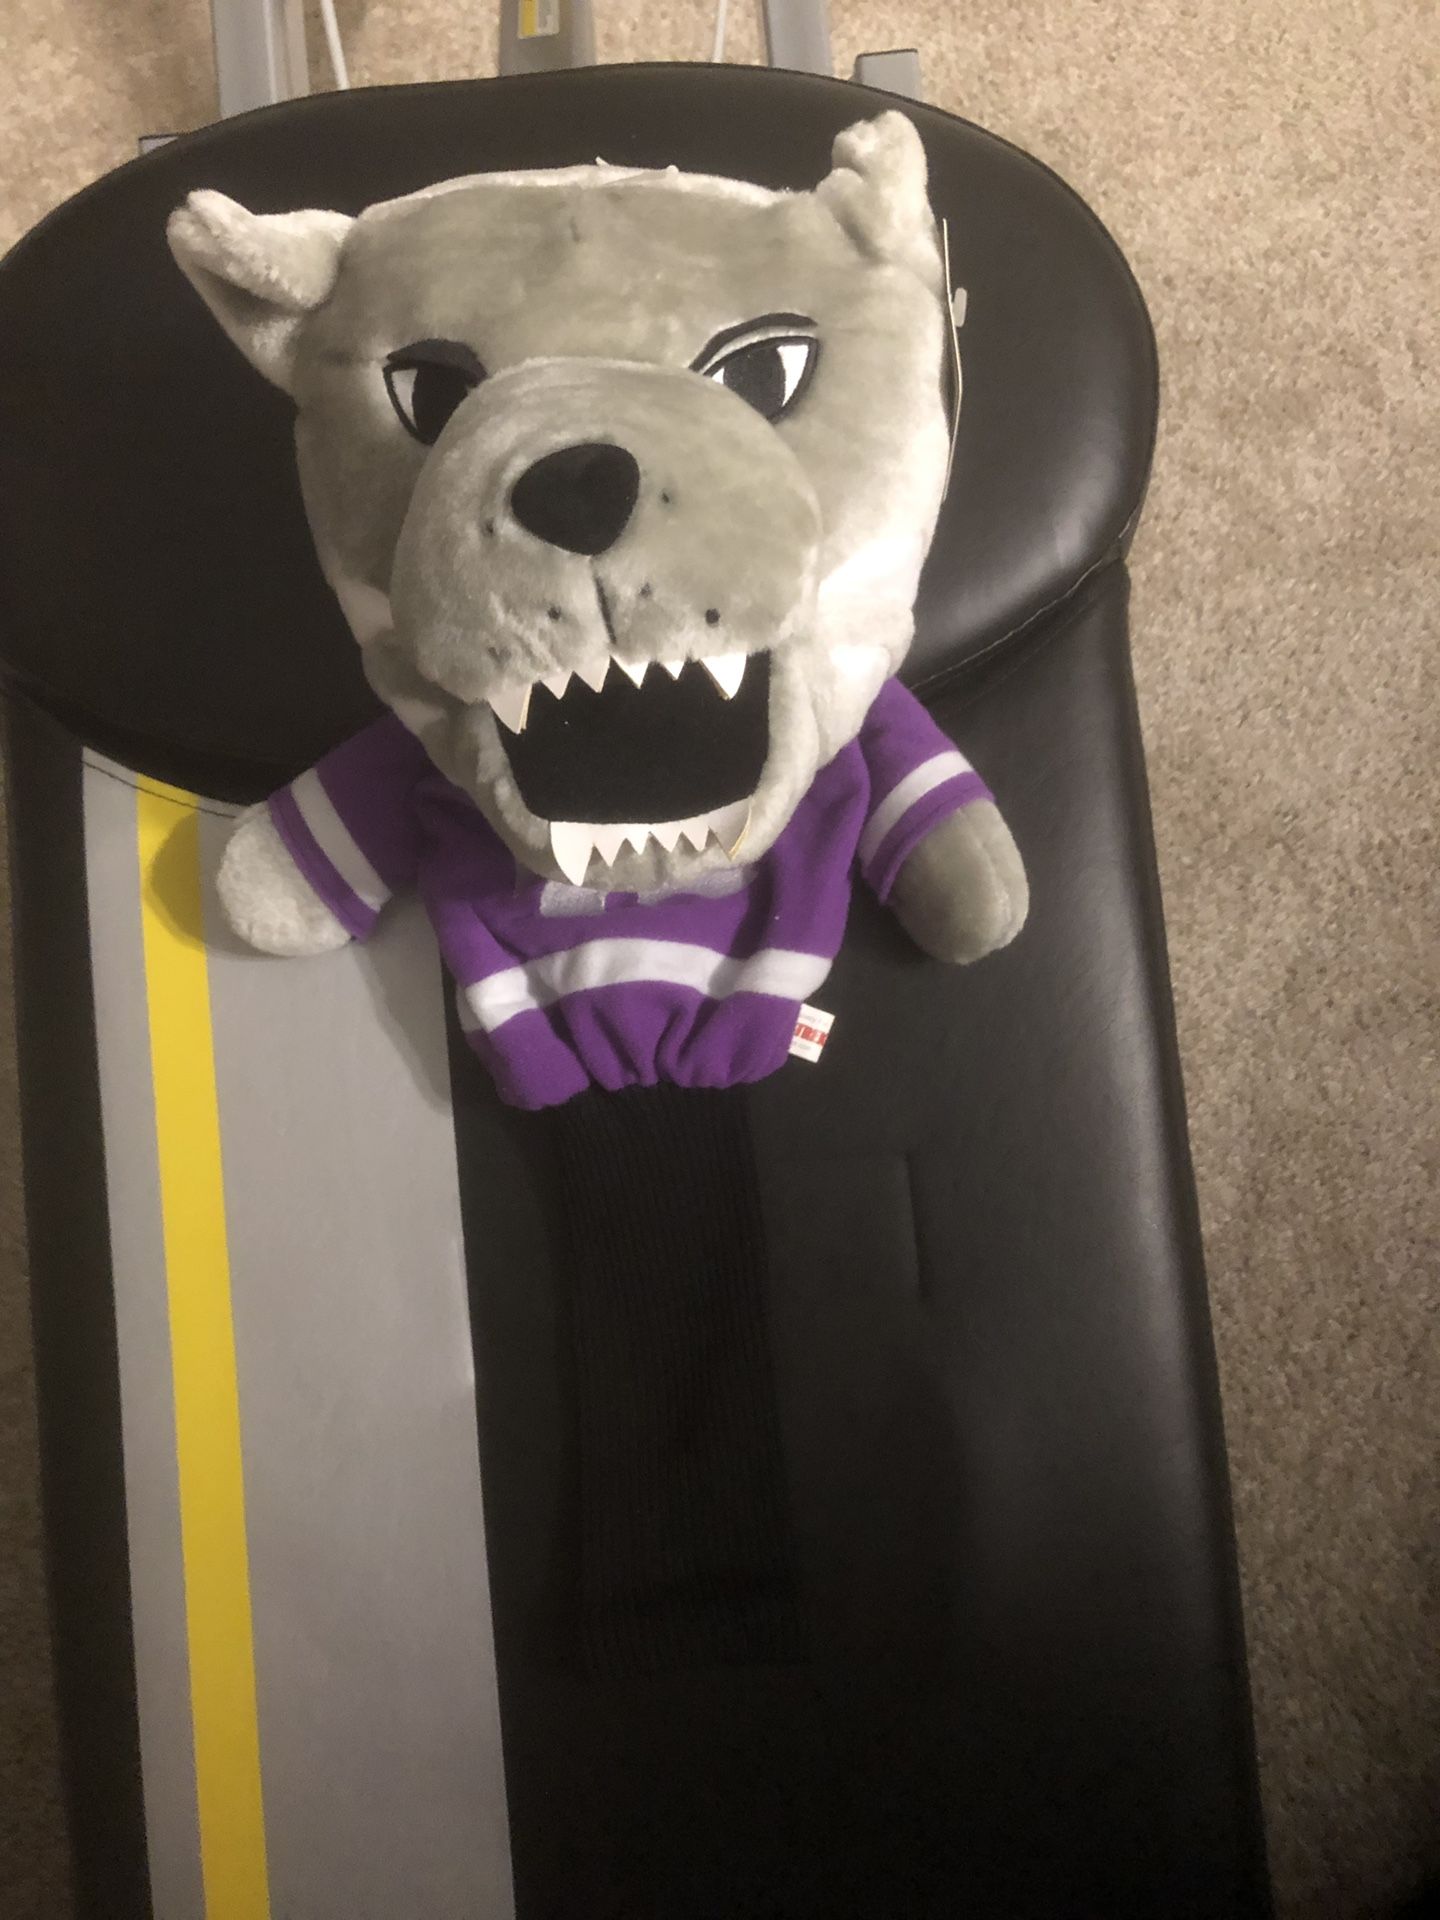 K-State “Willie the Wildcat” golf club head cover